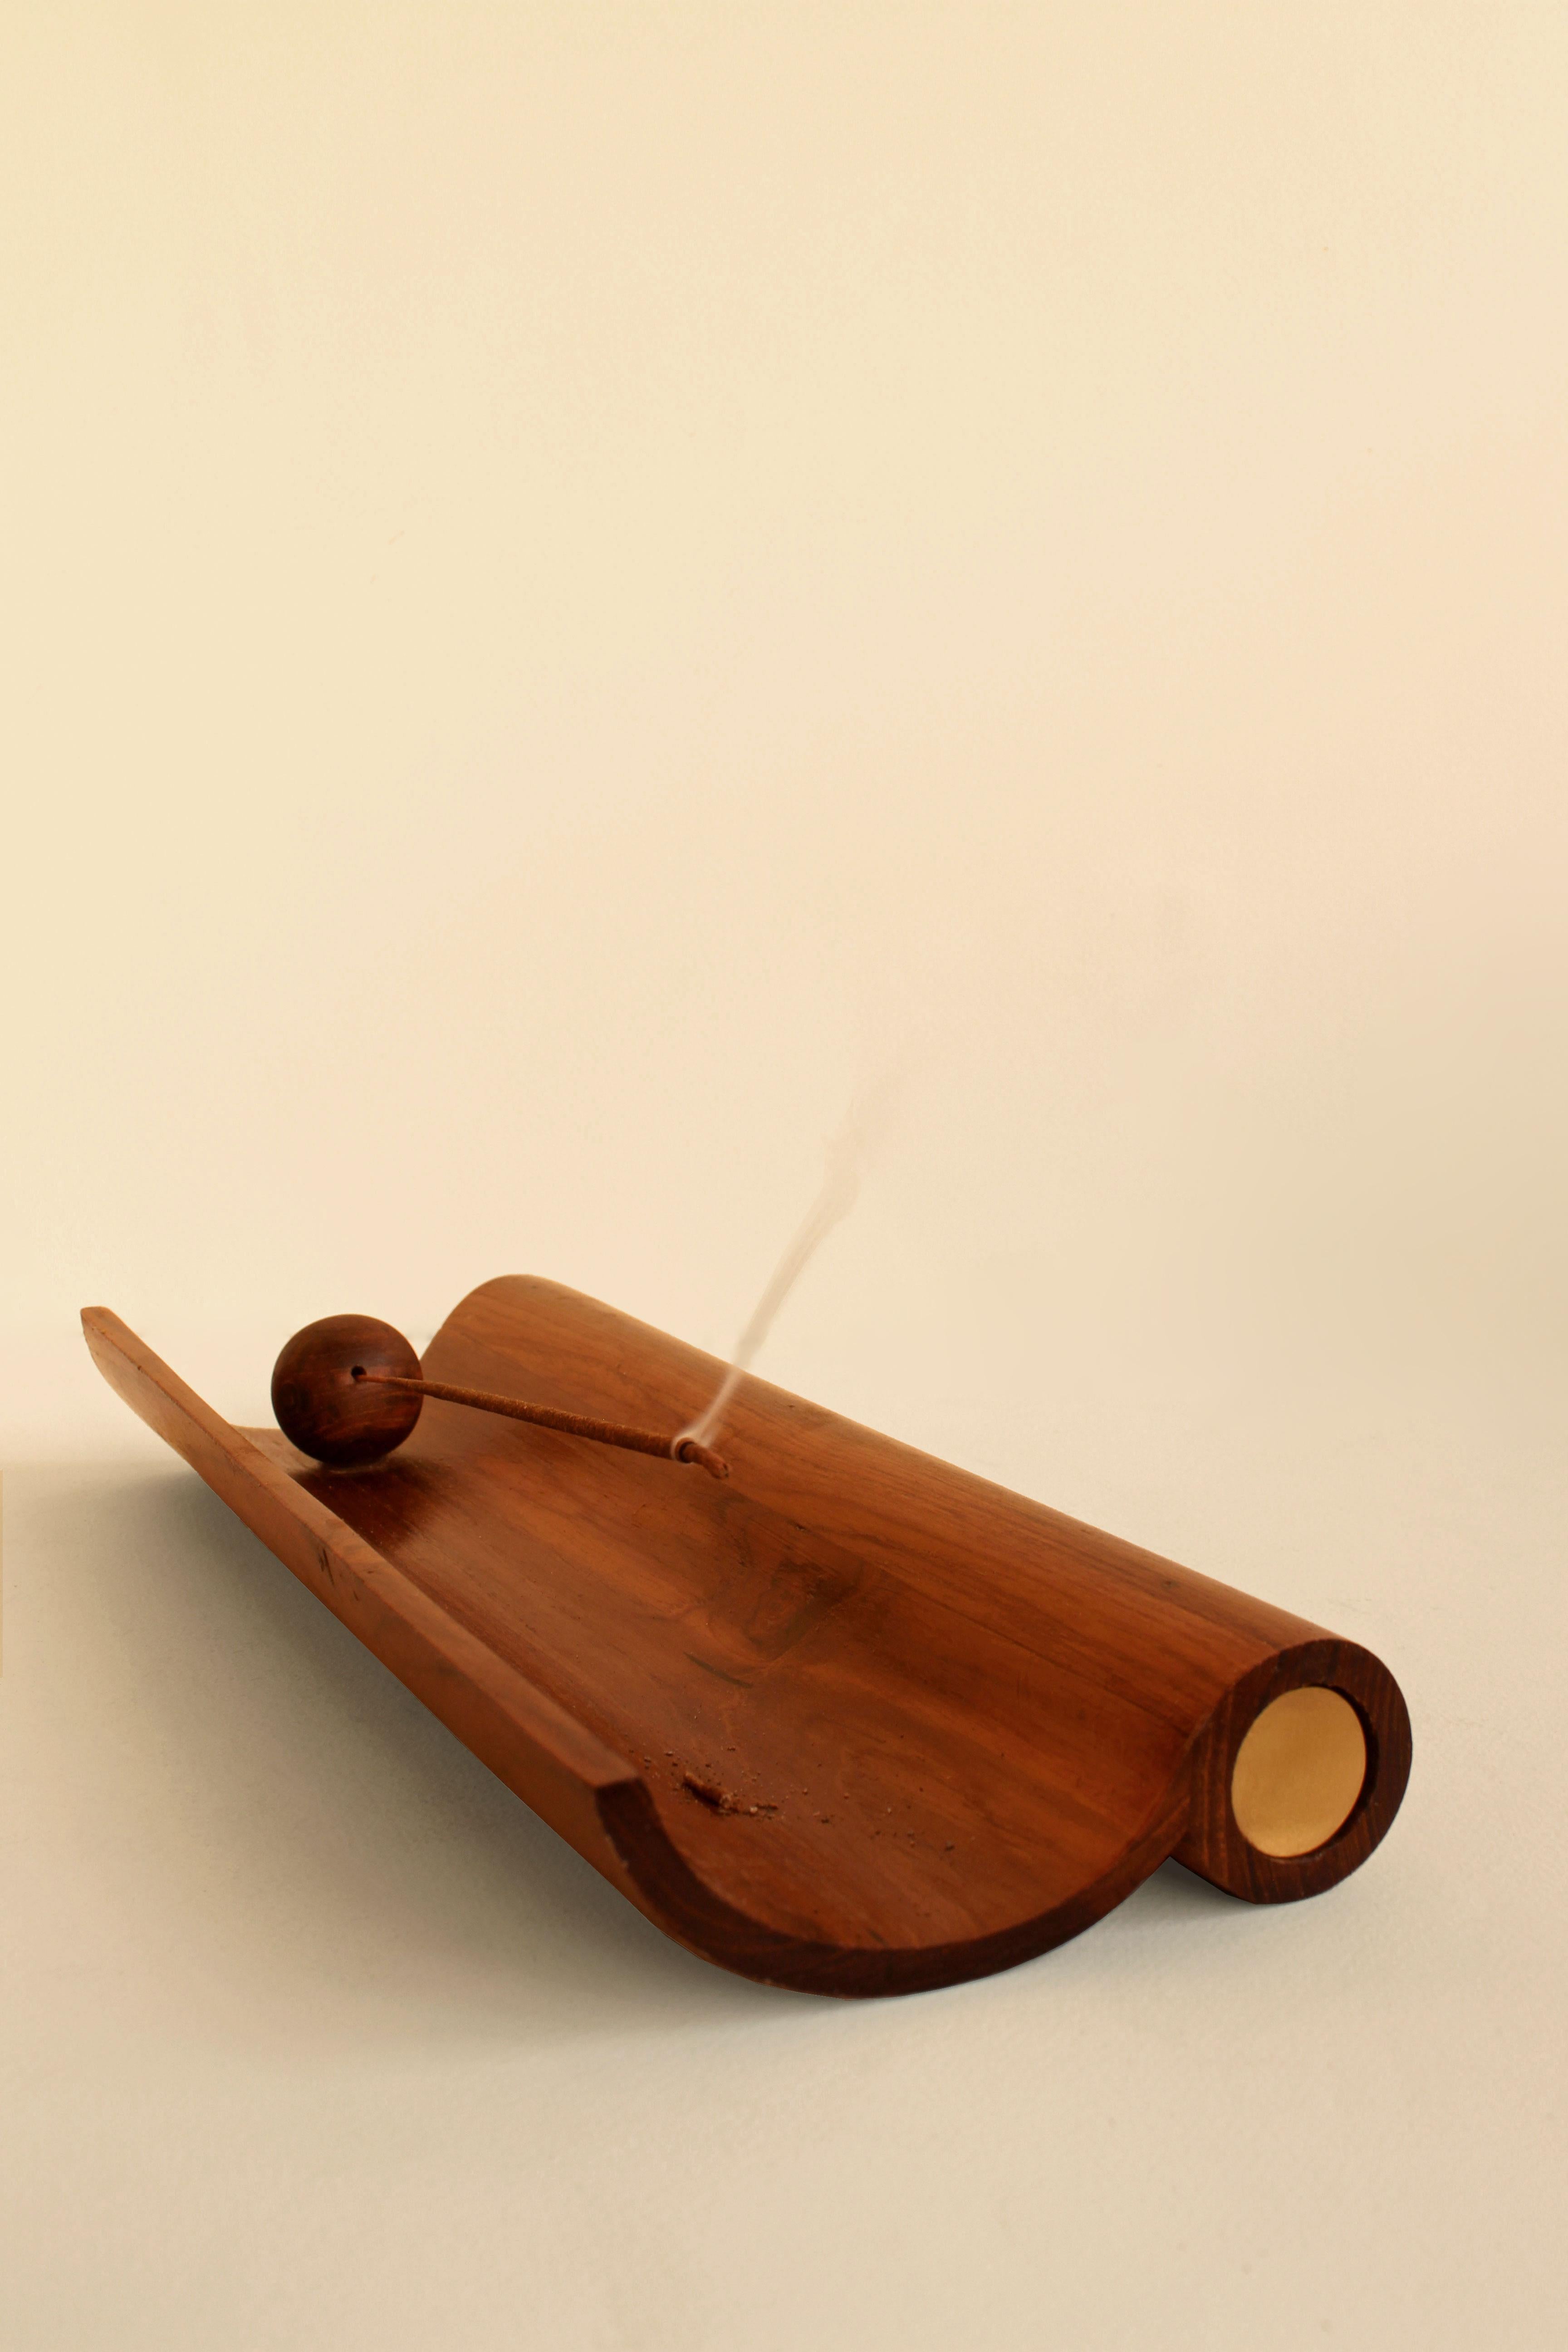 Aguru Incense Stick Holder by Studio Indigene
Dimensions: D 27.94 x W 11.43 x H 3.81 cm
Materials: Reclaimed Teak Wood, Brass.
Colors Brown, Natural Wooden, Brass Finish. 

Aguru elegantly holds an incense stick, and its brass casing slides out to